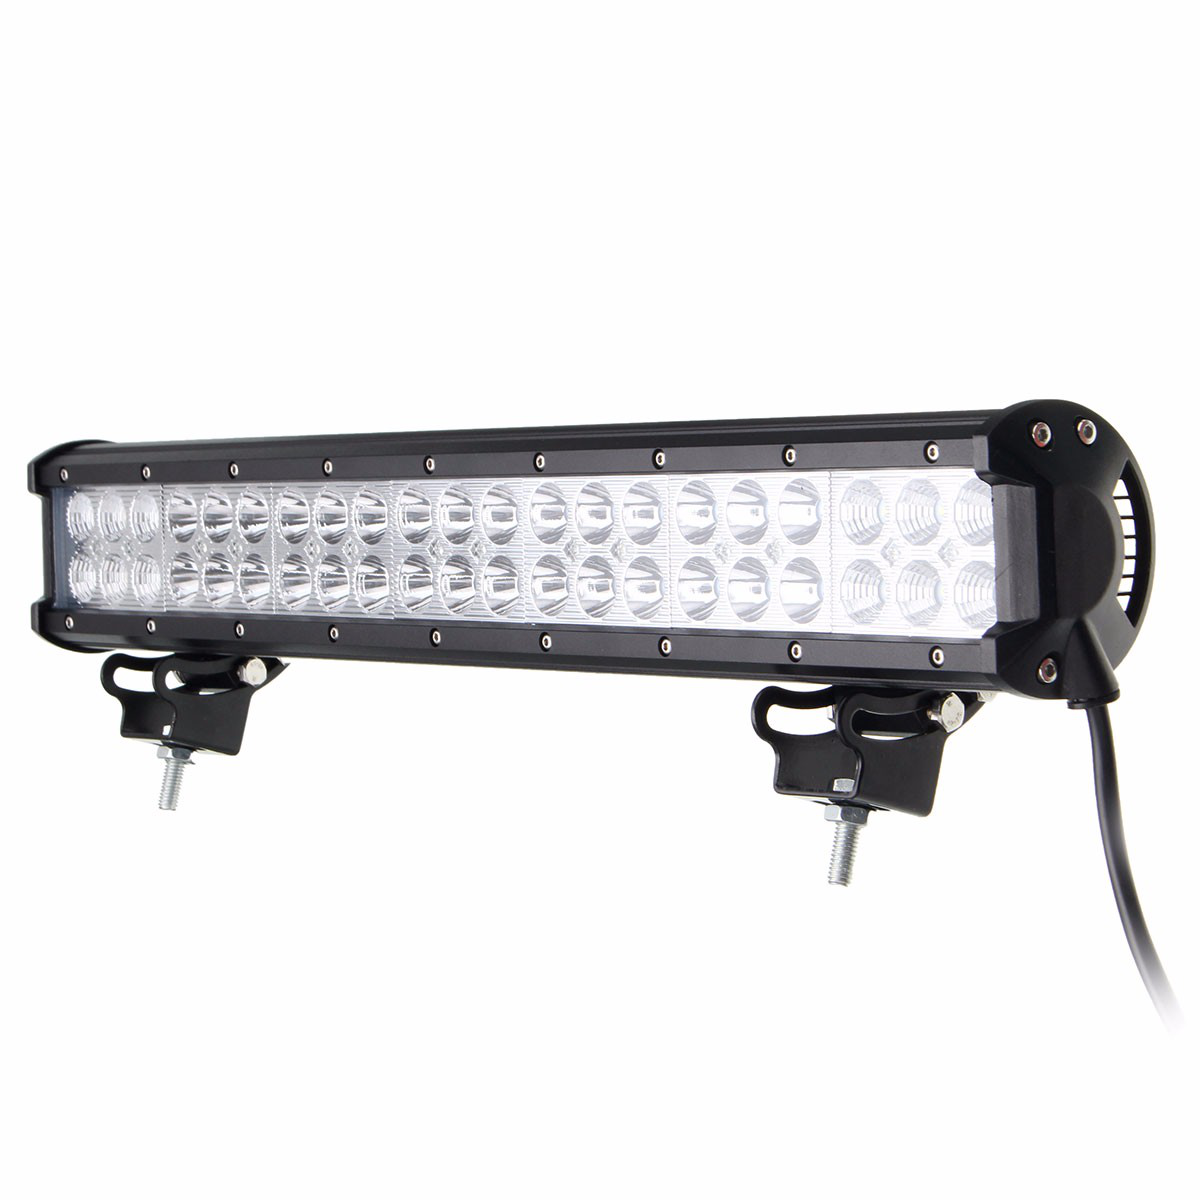 20Inch LED Work Driving Light Bars Spot Flood Combo Beam 126W for Jeep off Road SUV ATV